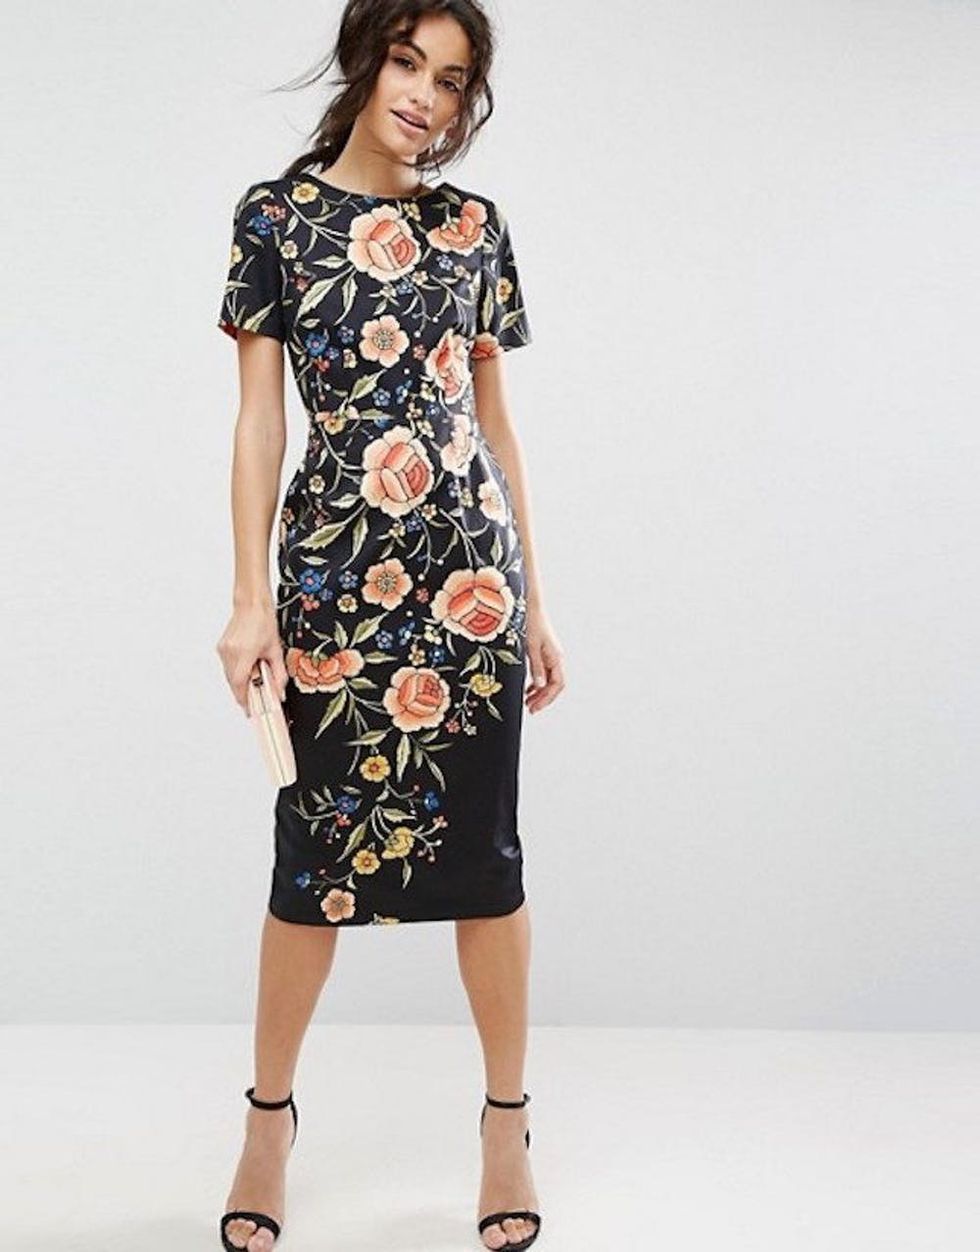 10 Duchess Kate-Worthy Winter Floral Dresses to Wear Now - Brit + Co